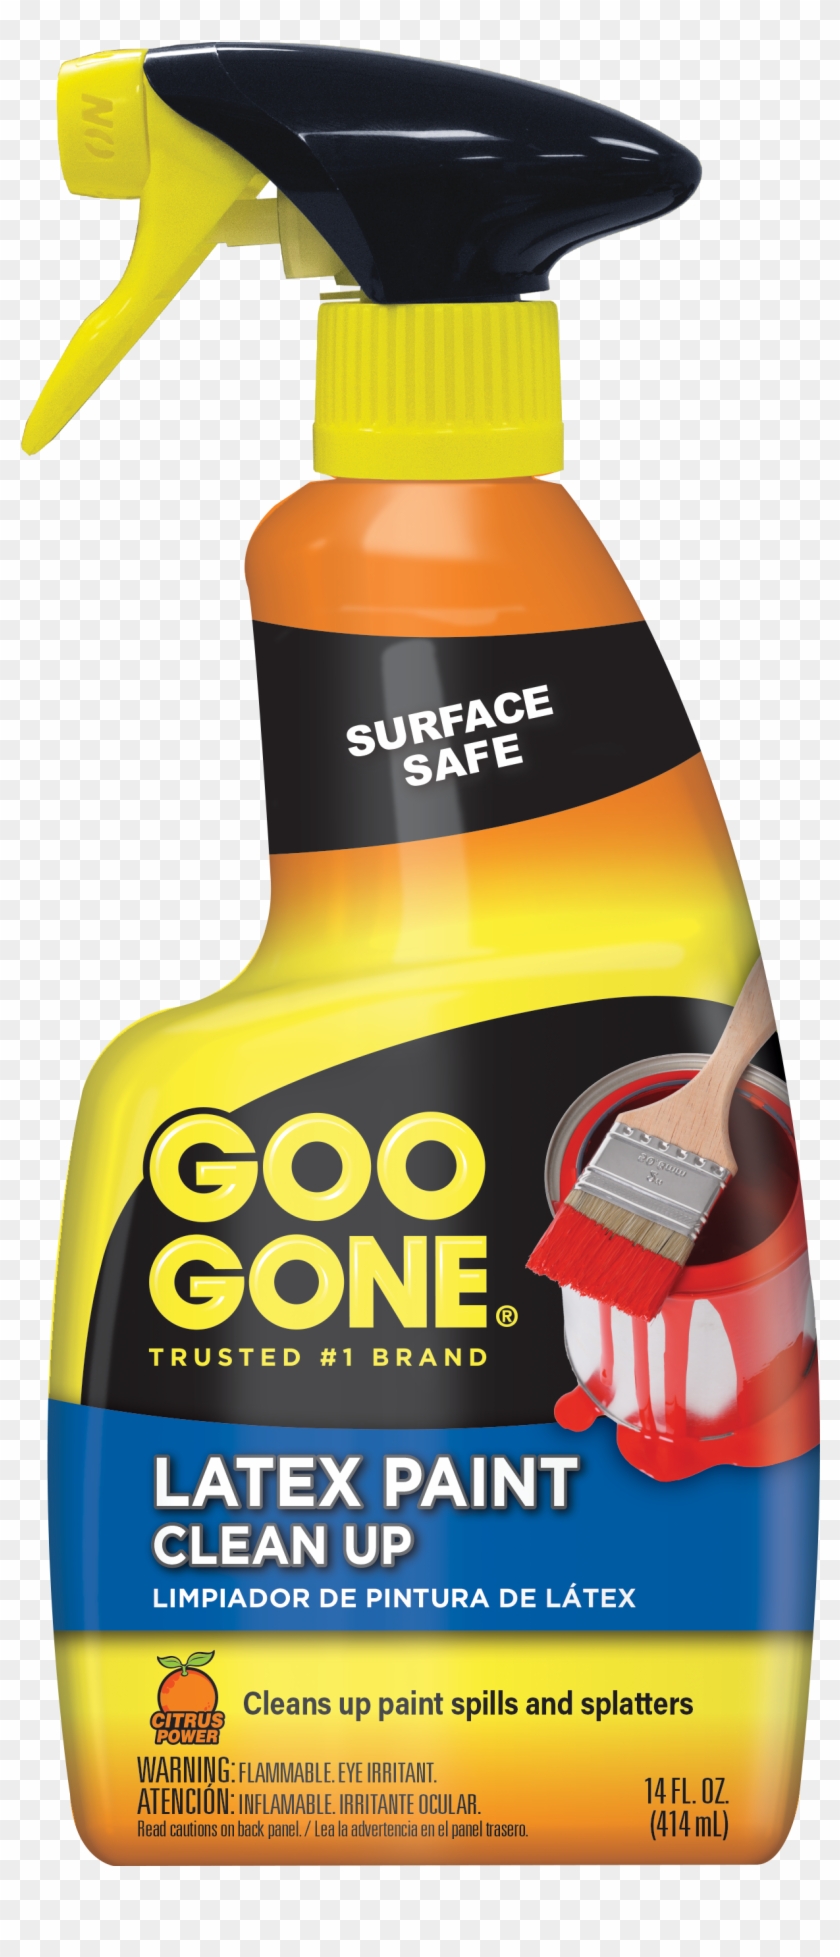 Goo Gone Latex Paint Clean-up, Perfect For Spills And - Goo Gone Grout And Tile Cleaner Clipart #3568795